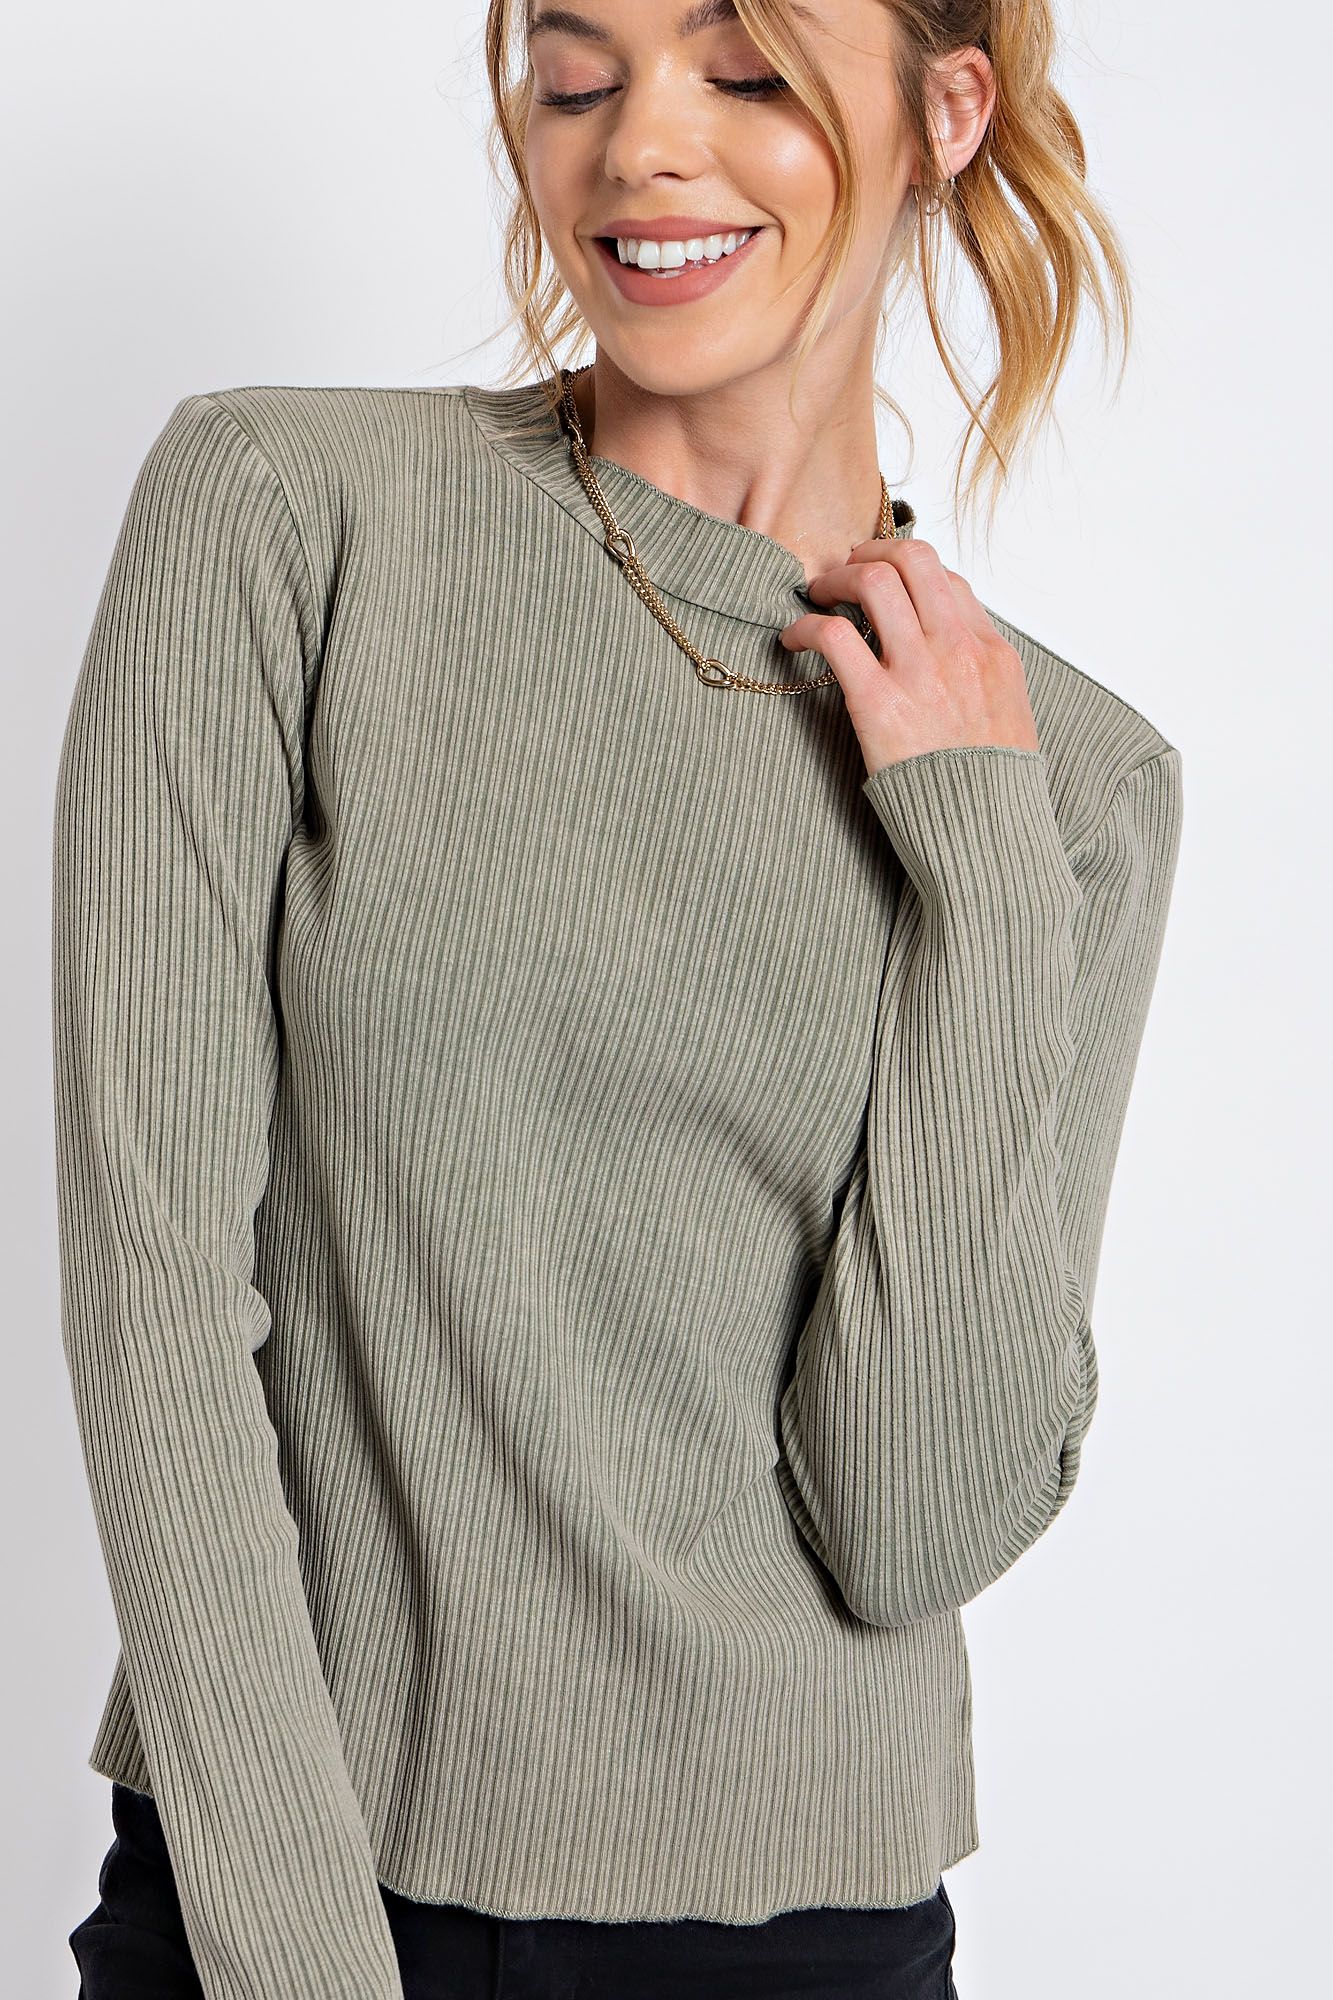 Easel Mineral Washed Rib Knit Mock Neck Lettuce Trim Edge Fitted Slim Top